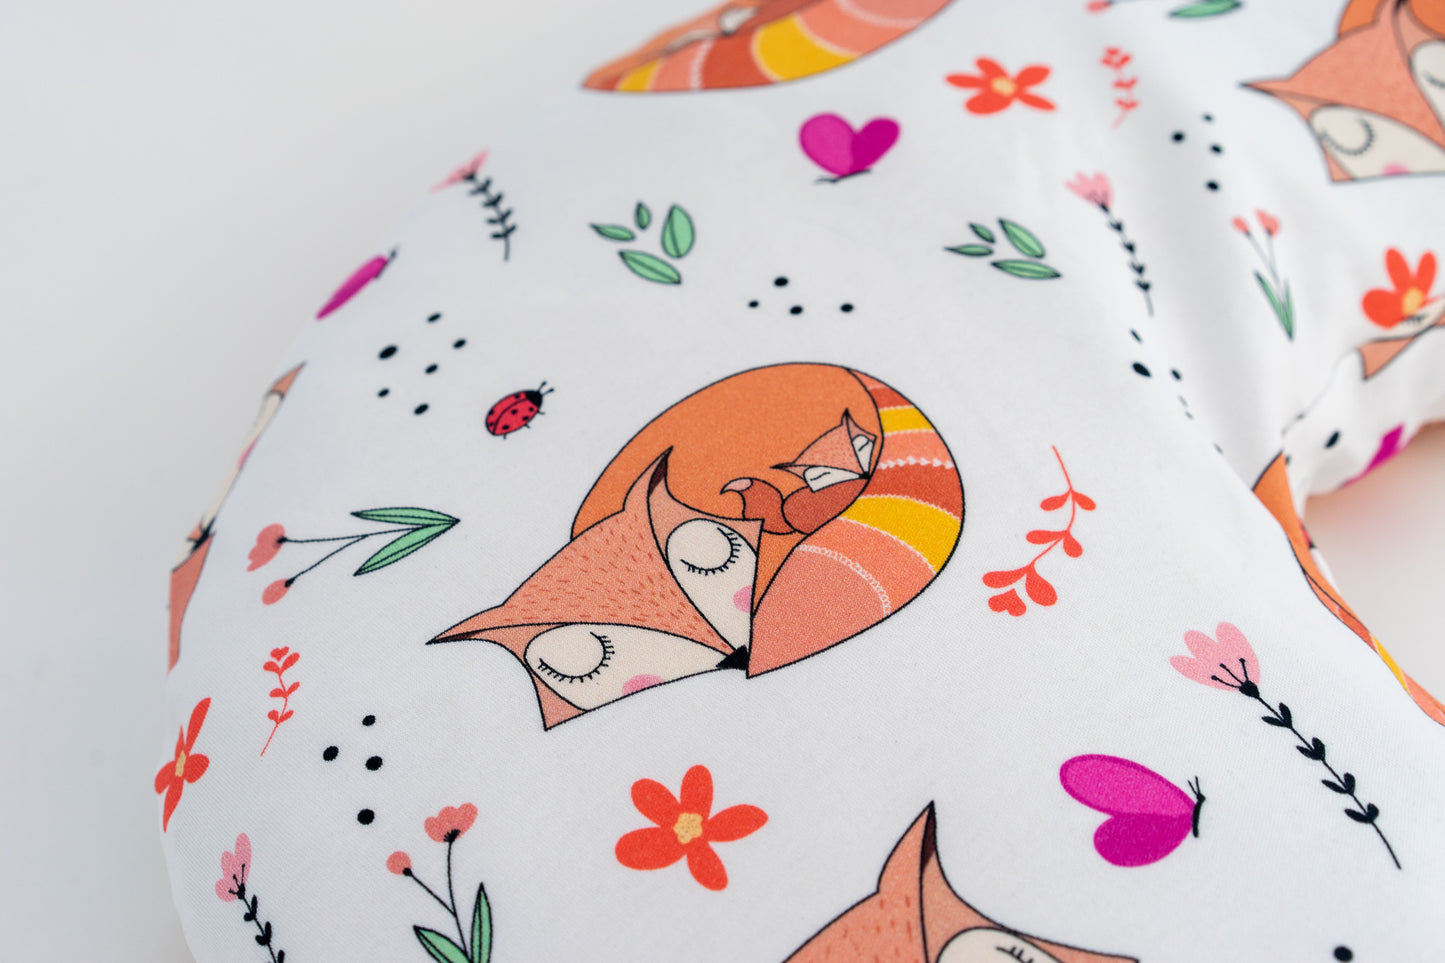 Nursing Pillow Cover - Snuggling Foxes - Animal Collection - Magnolia Organics